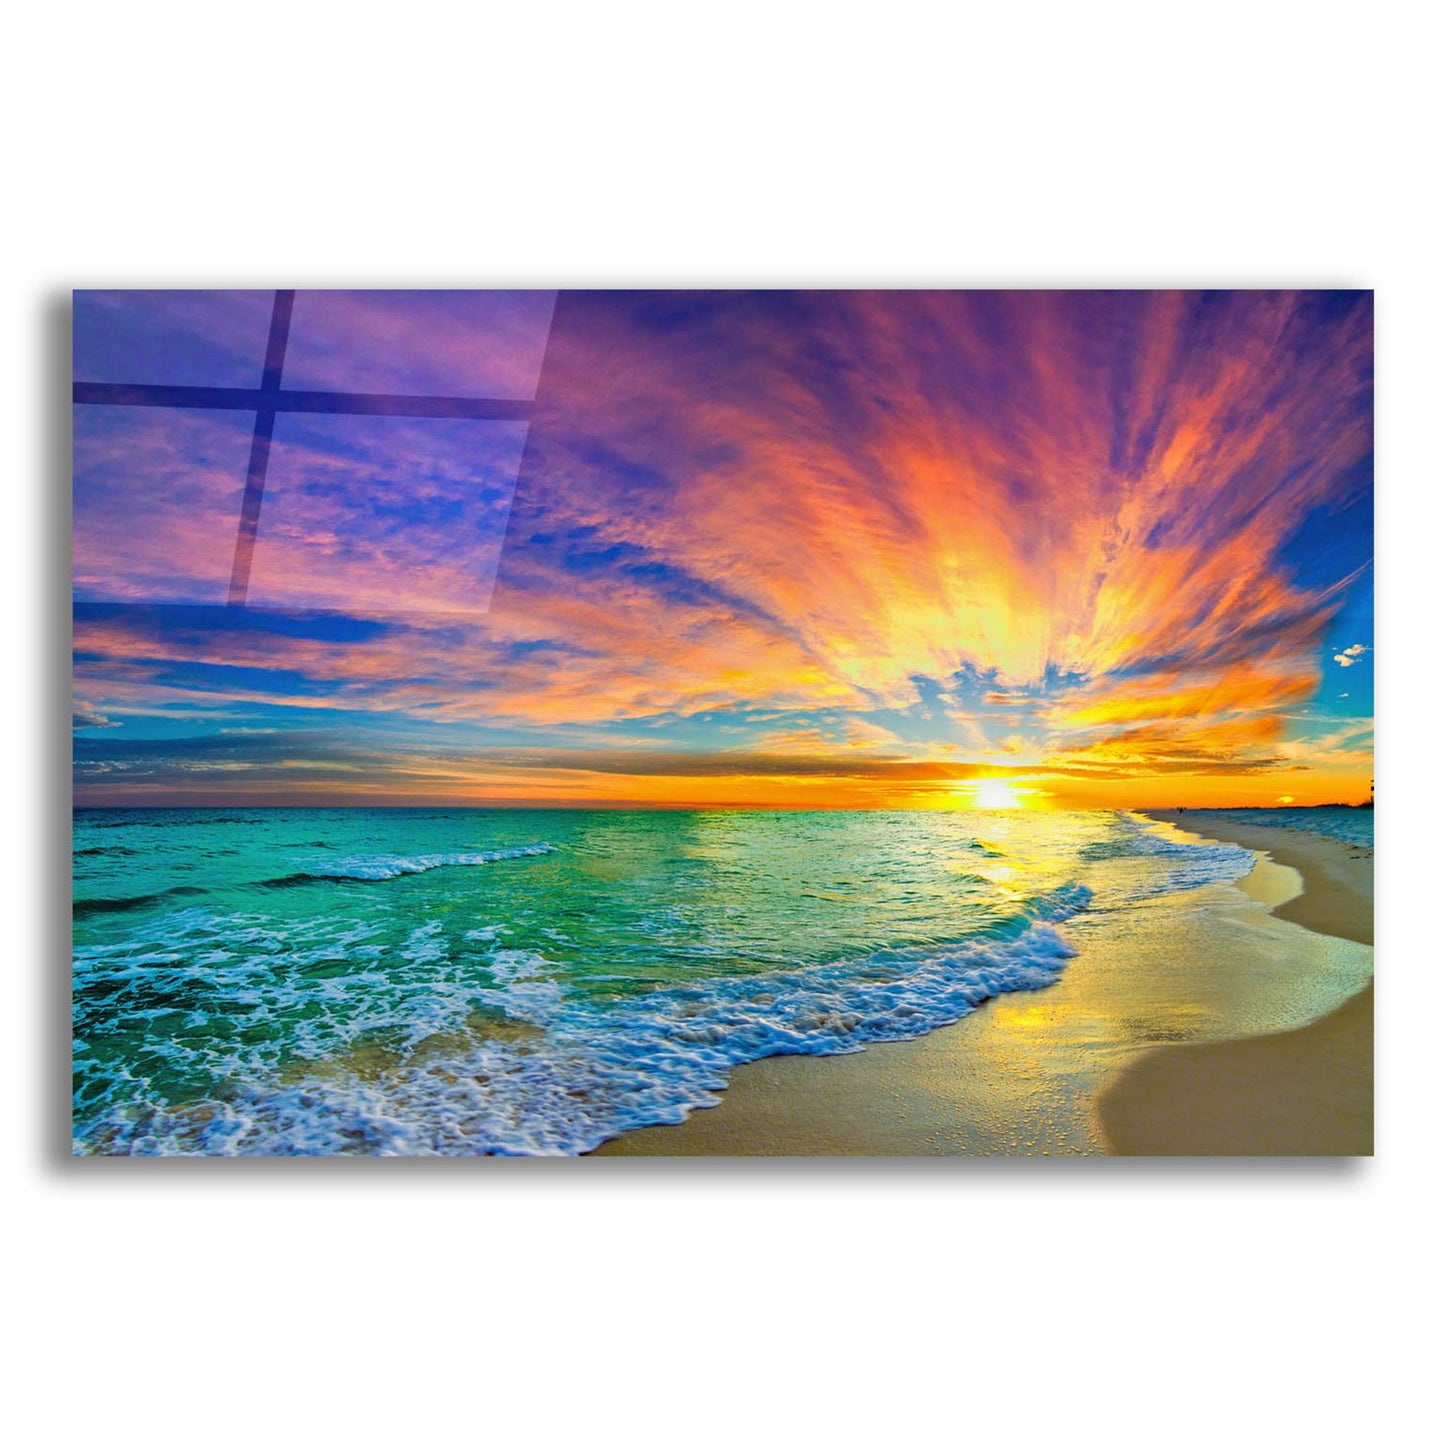 Epic Art 'Colorful Ocean Sunset Orange And Red Beach Sunset' by Ezra Tanner, Acrylic Glass Wall Art,24x16